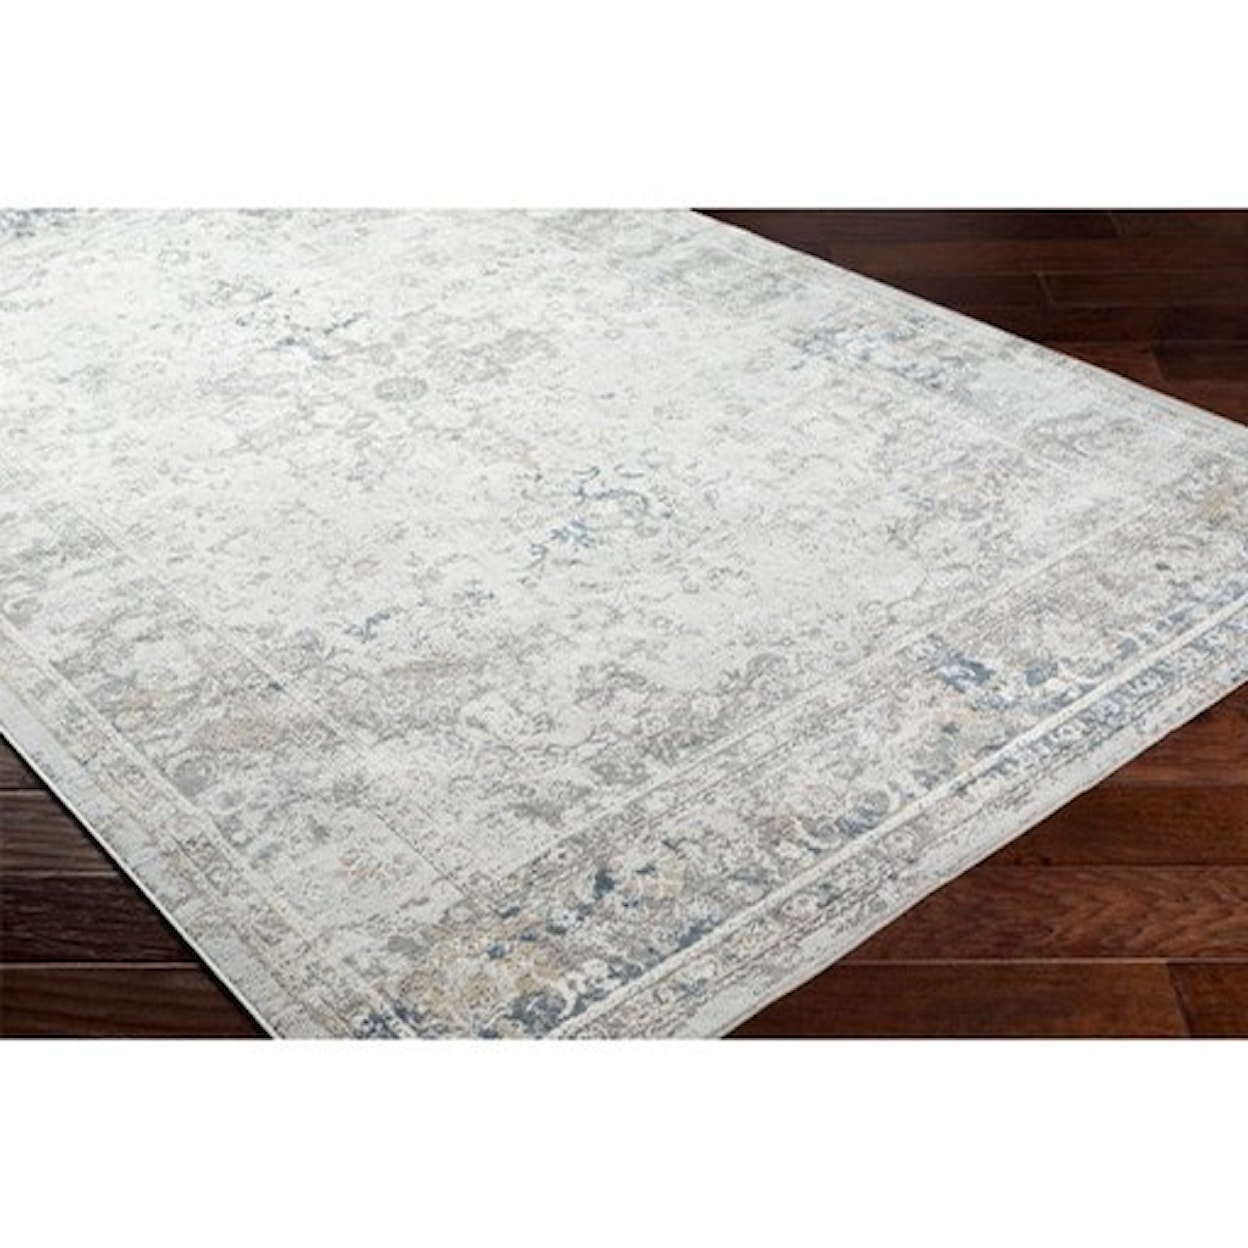 Ruby-Gordon Accents Norland 12' x 15' Rug